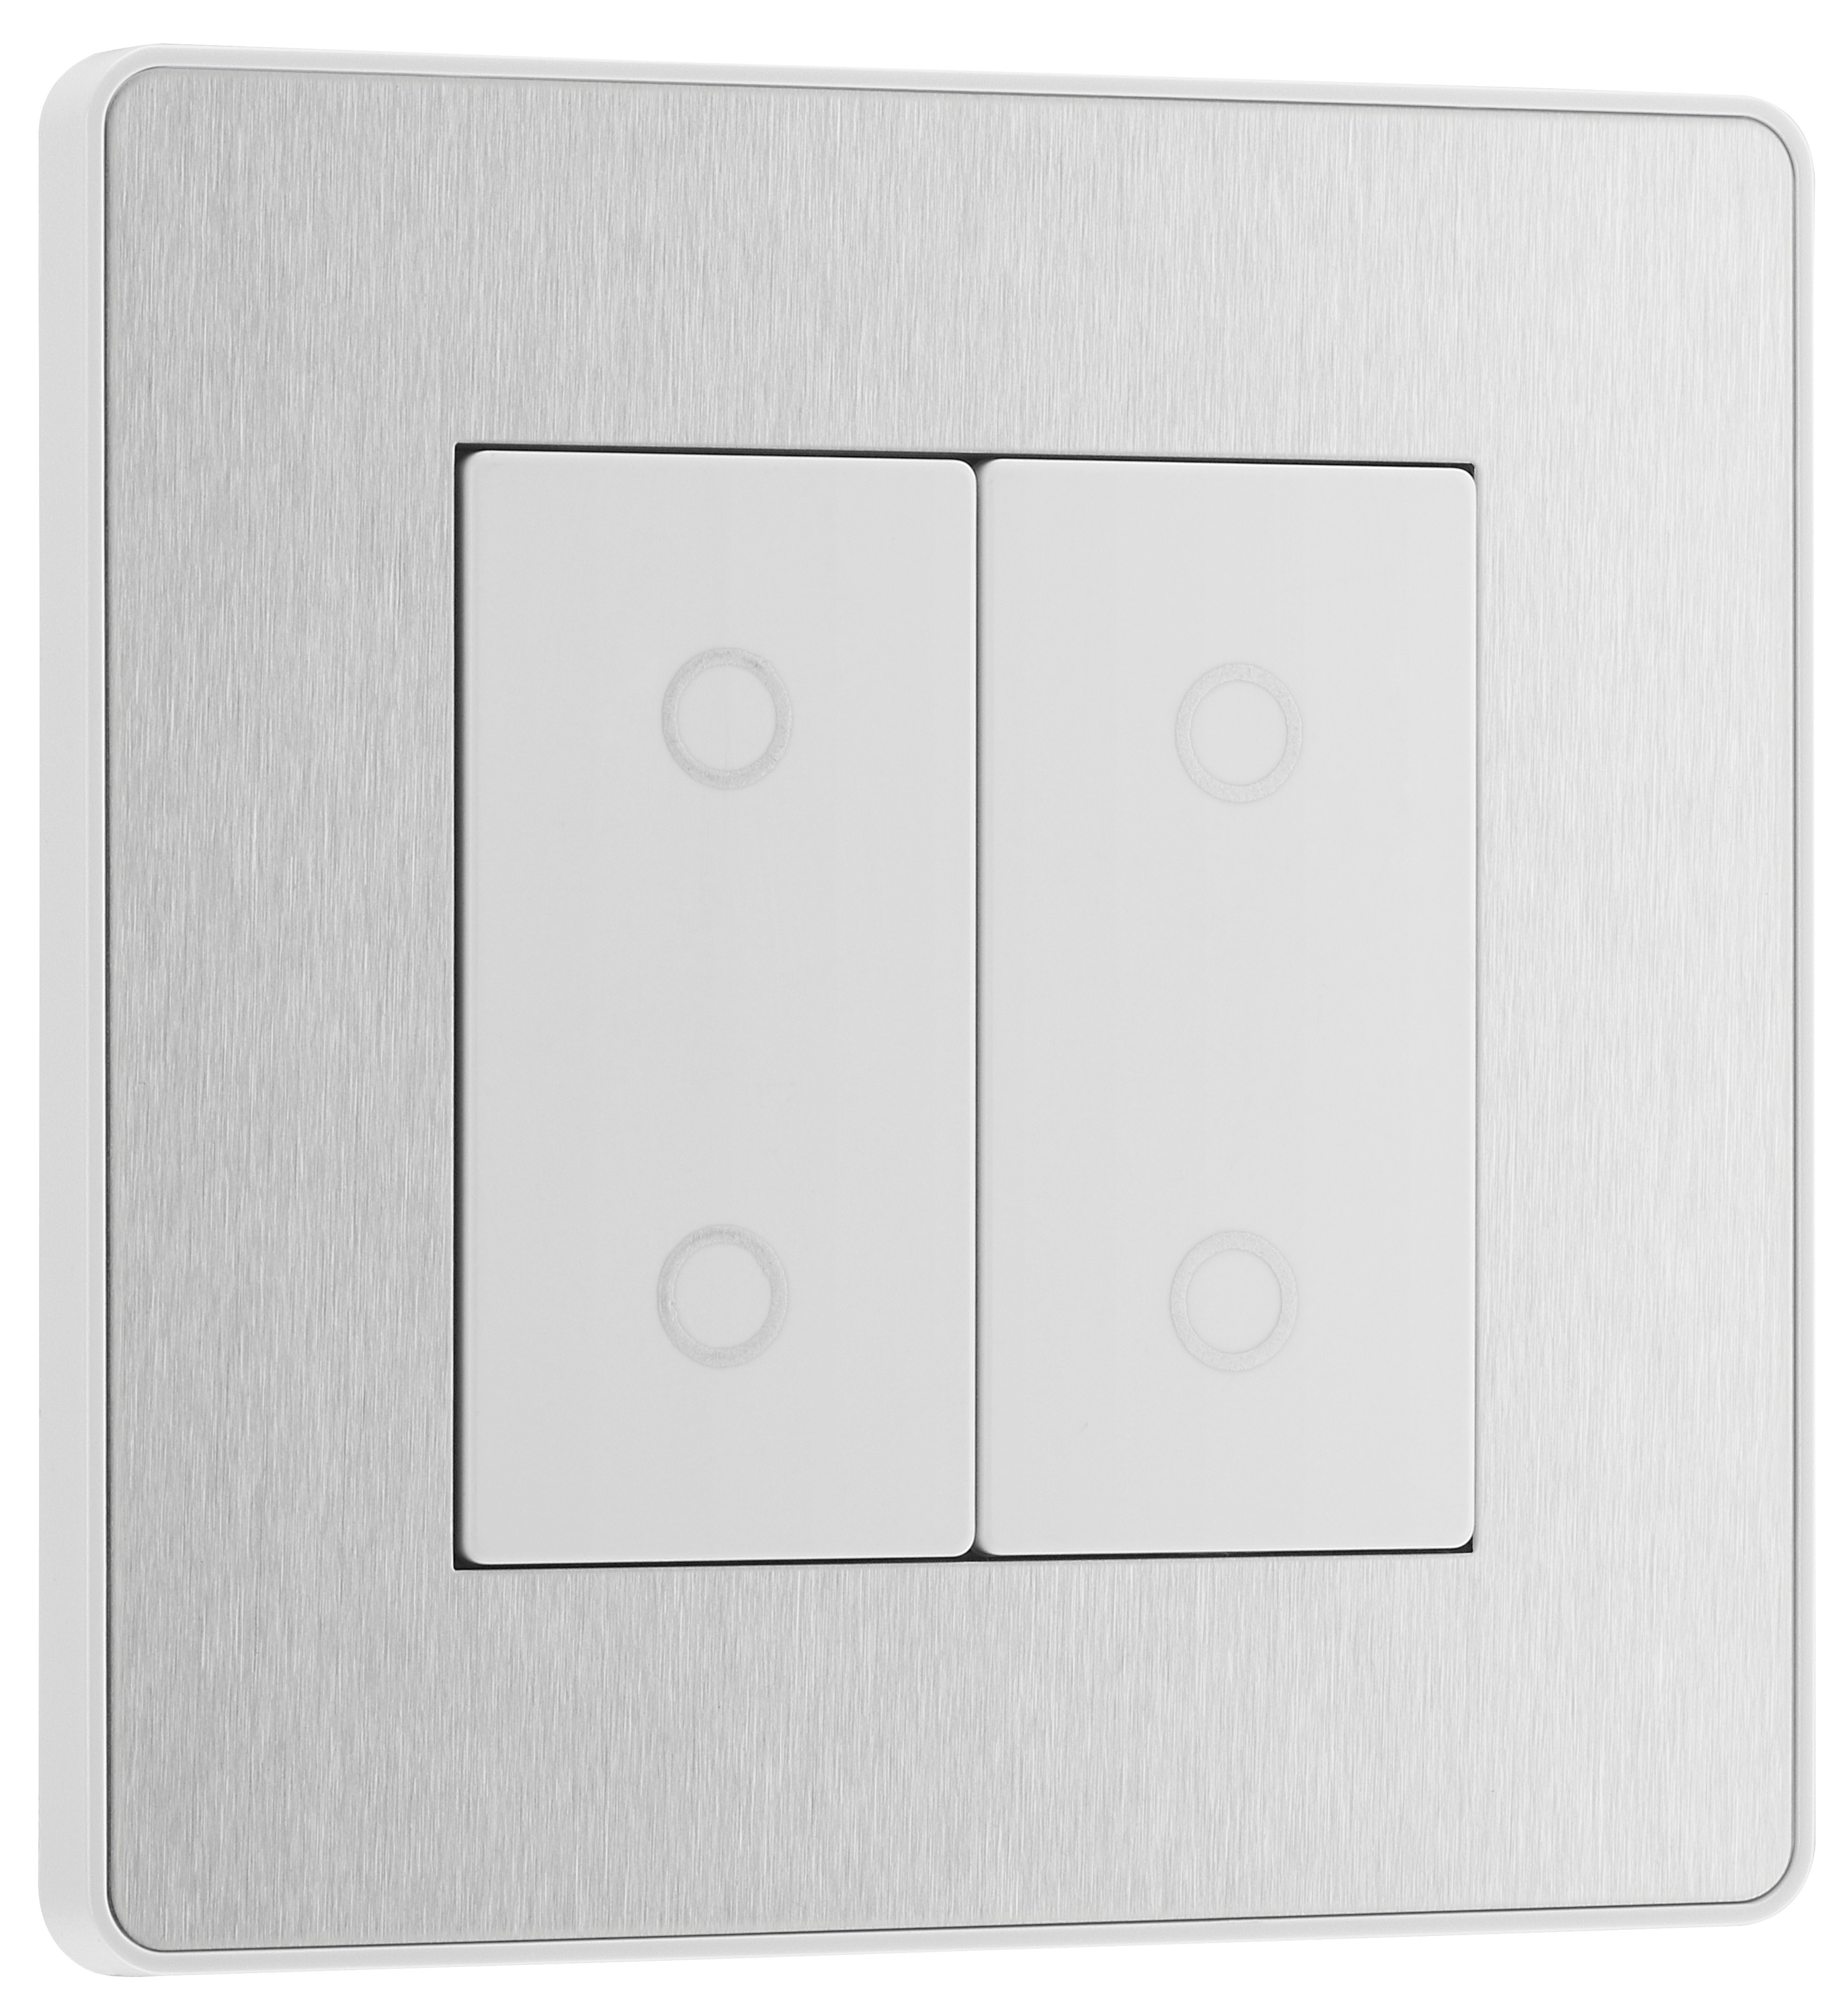 Image of BG Evolve Brushed Steel 2 Way Secondary Double Touch Dimmer Switch - 200W